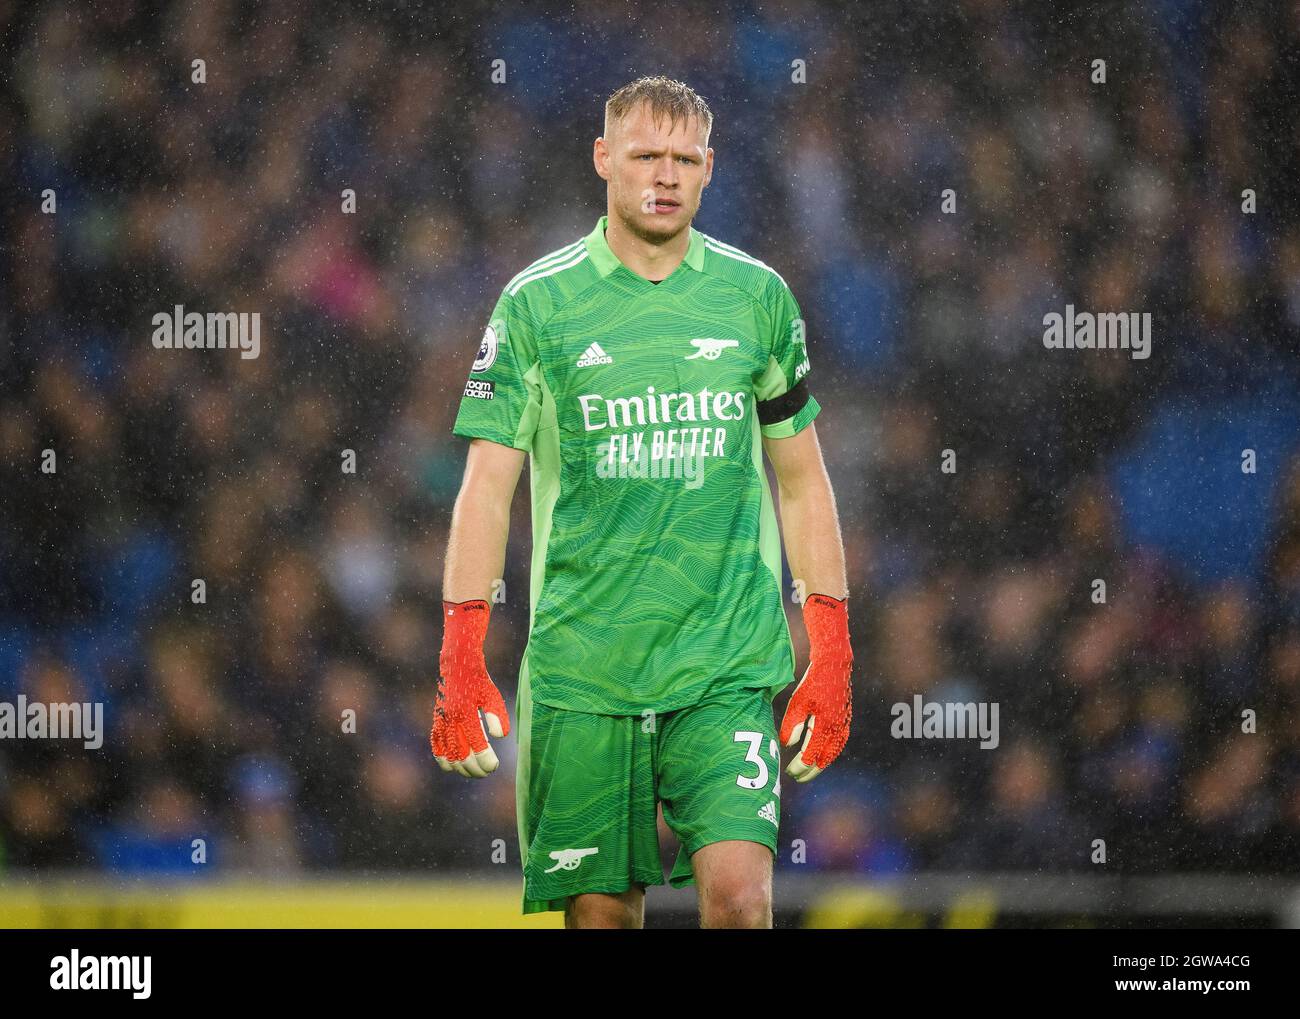 02 October 2021 - Brighton and Hove Albion v Arsenal - Premier League - AMEX Stadium  Arsenal's Aaran Ramsdale during the Premier League match at the Amex Stadium.  Picture Credit : © Mark Pain / Alamy Live News Stock Photo